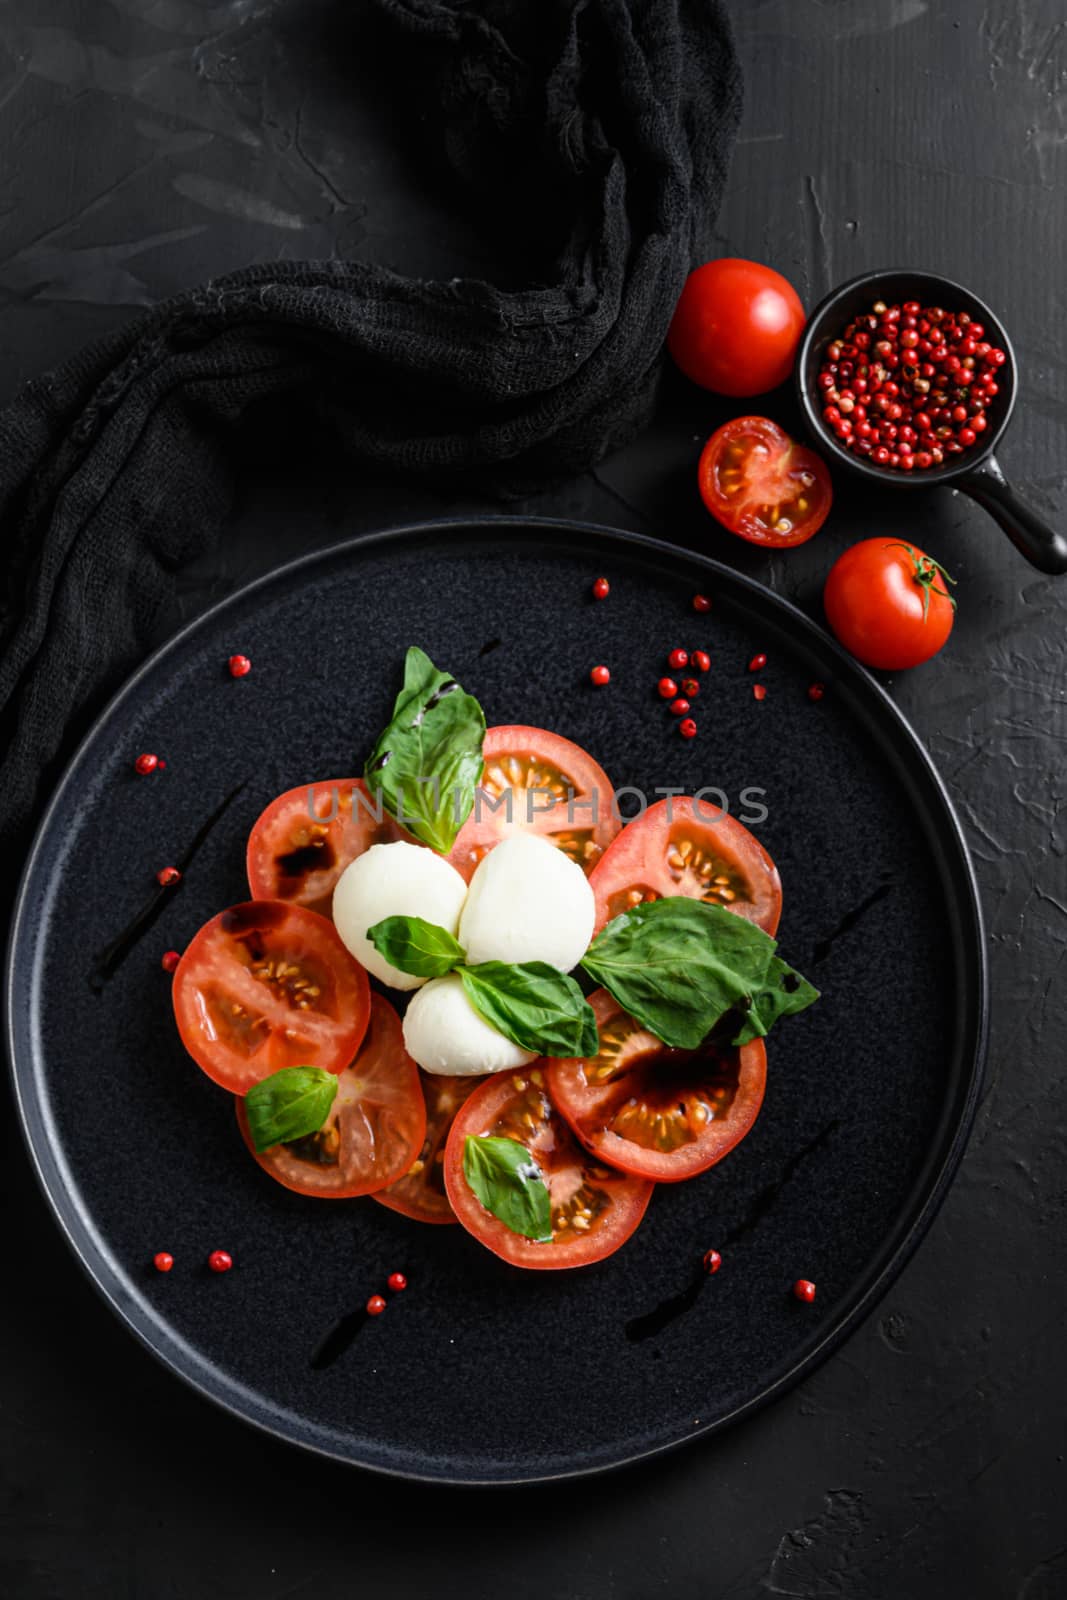 Caprese salad Italian cuisine concept Tomato and mozzarella slices with basil leaves on black ceramic platwantipasta black textured background top view by Ilianesolenyi